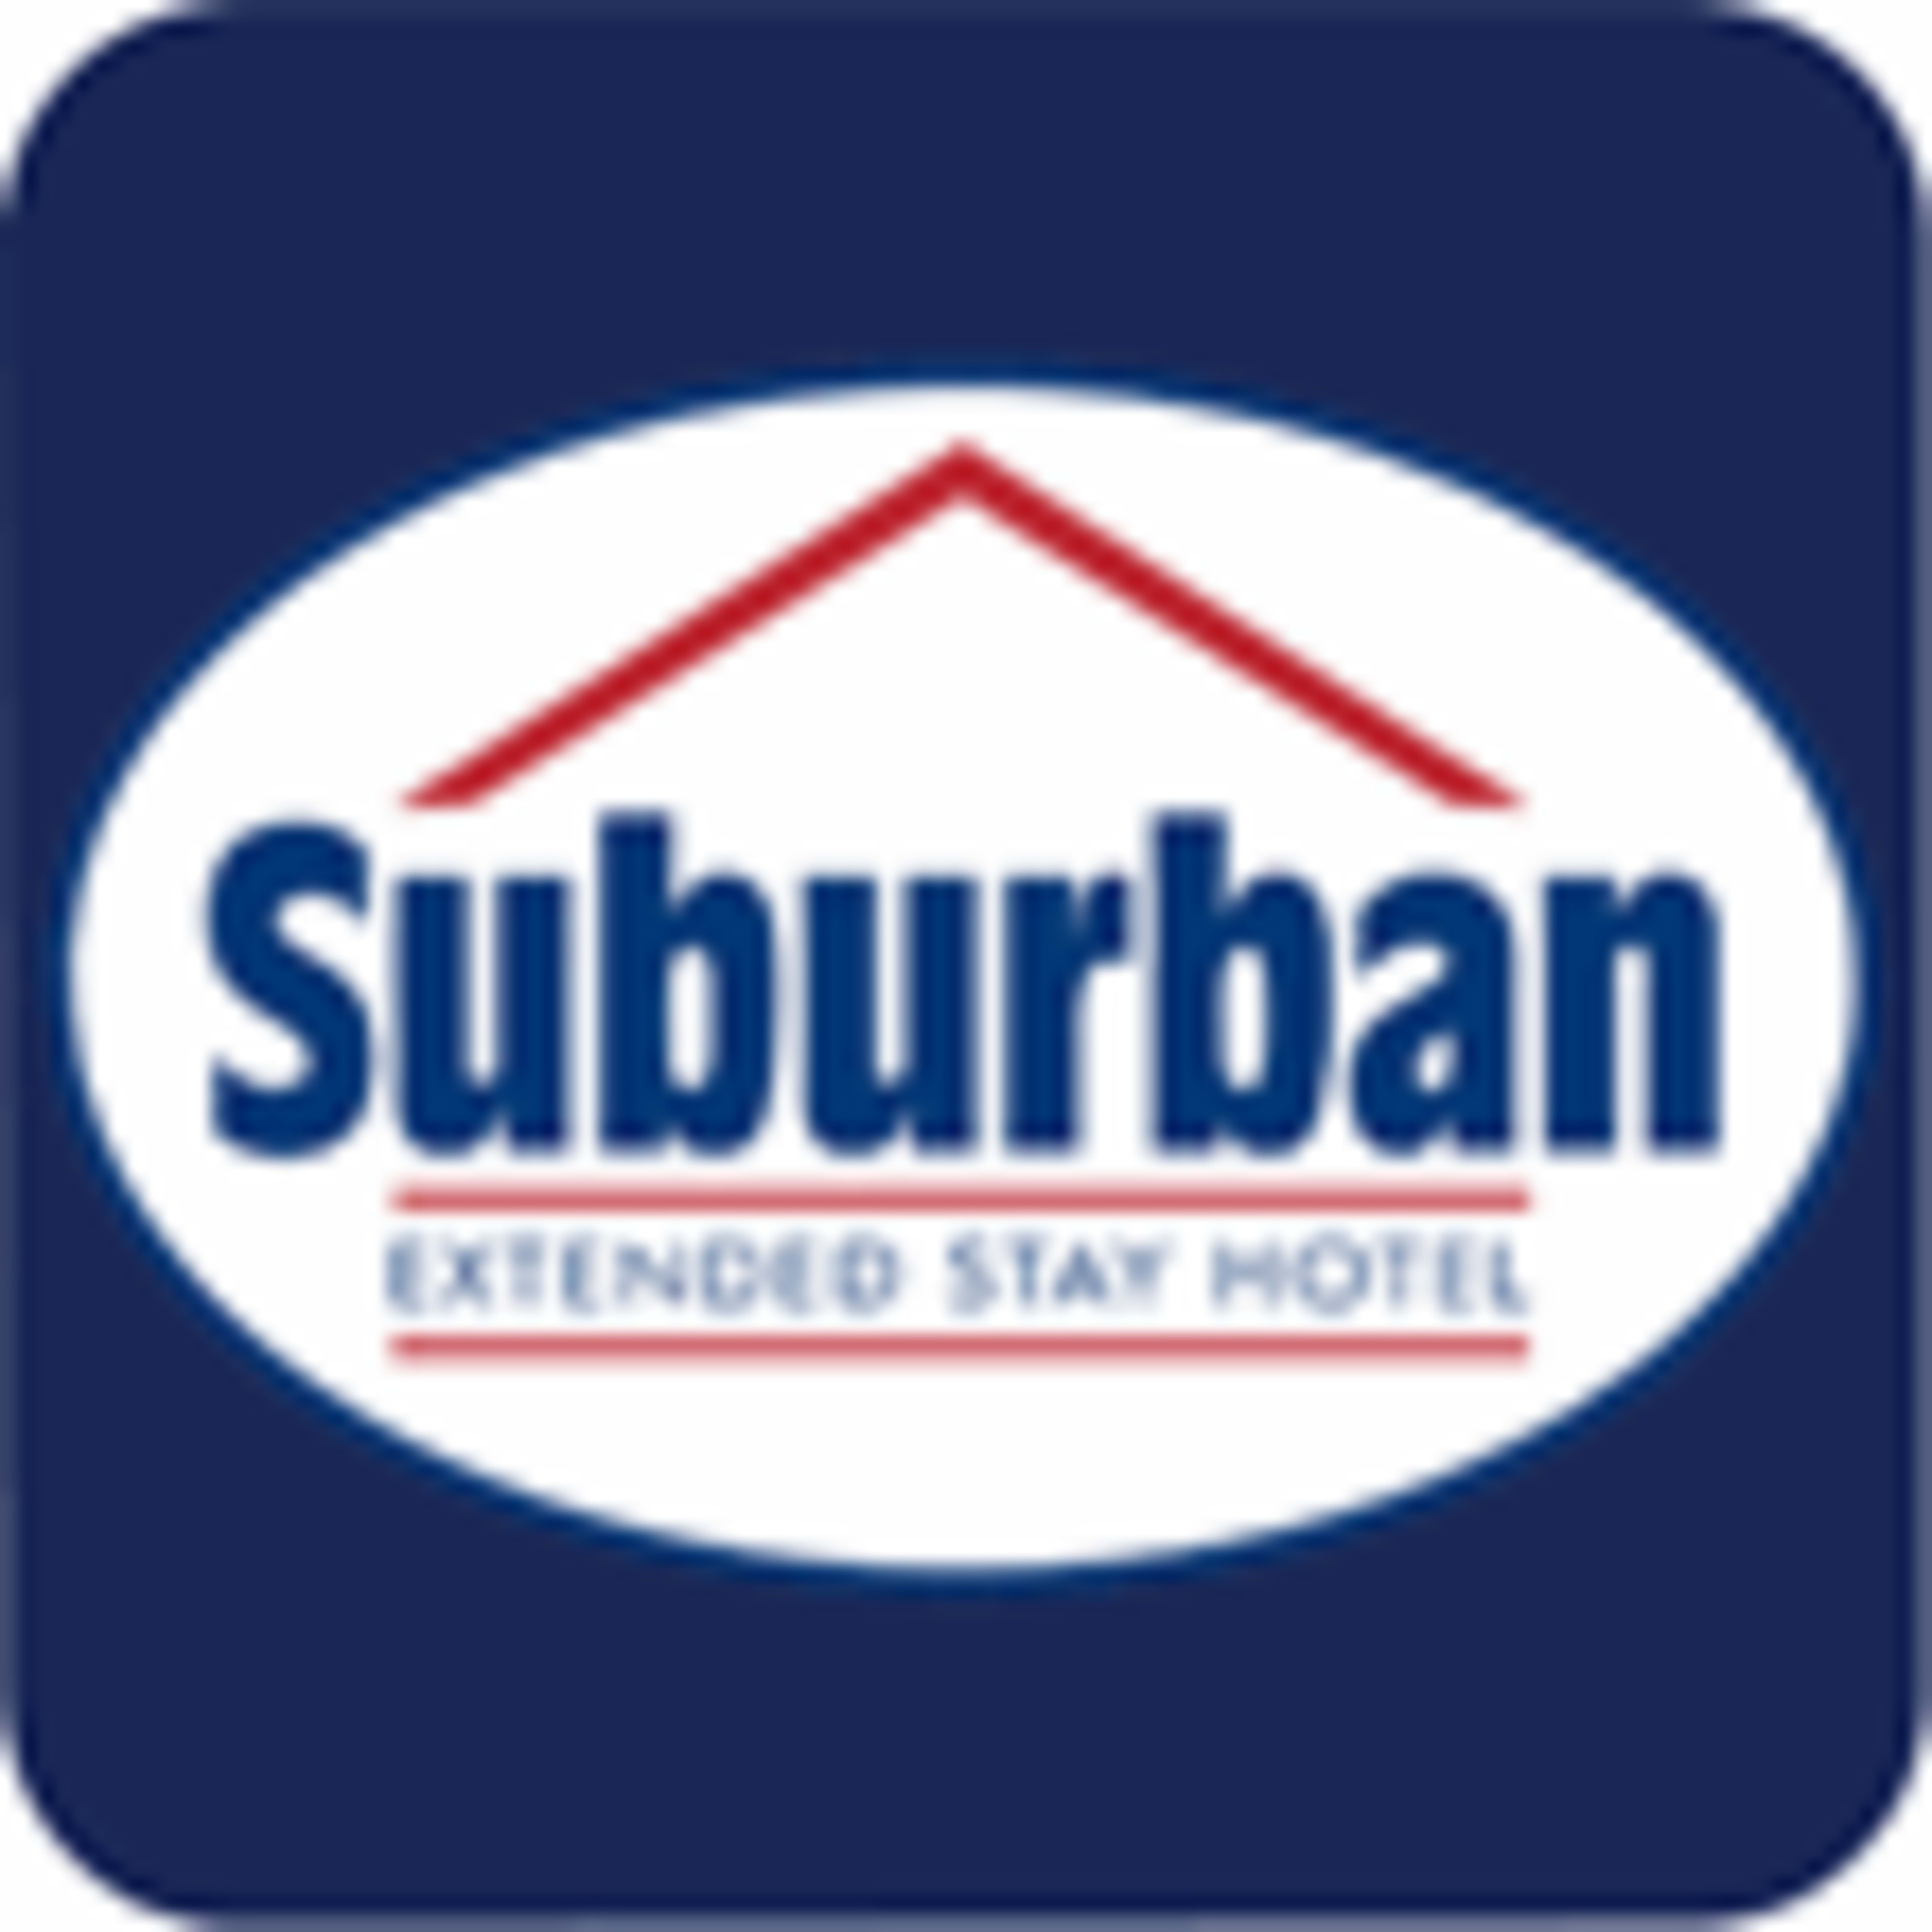 Suburban Extended Stay Hotel Code